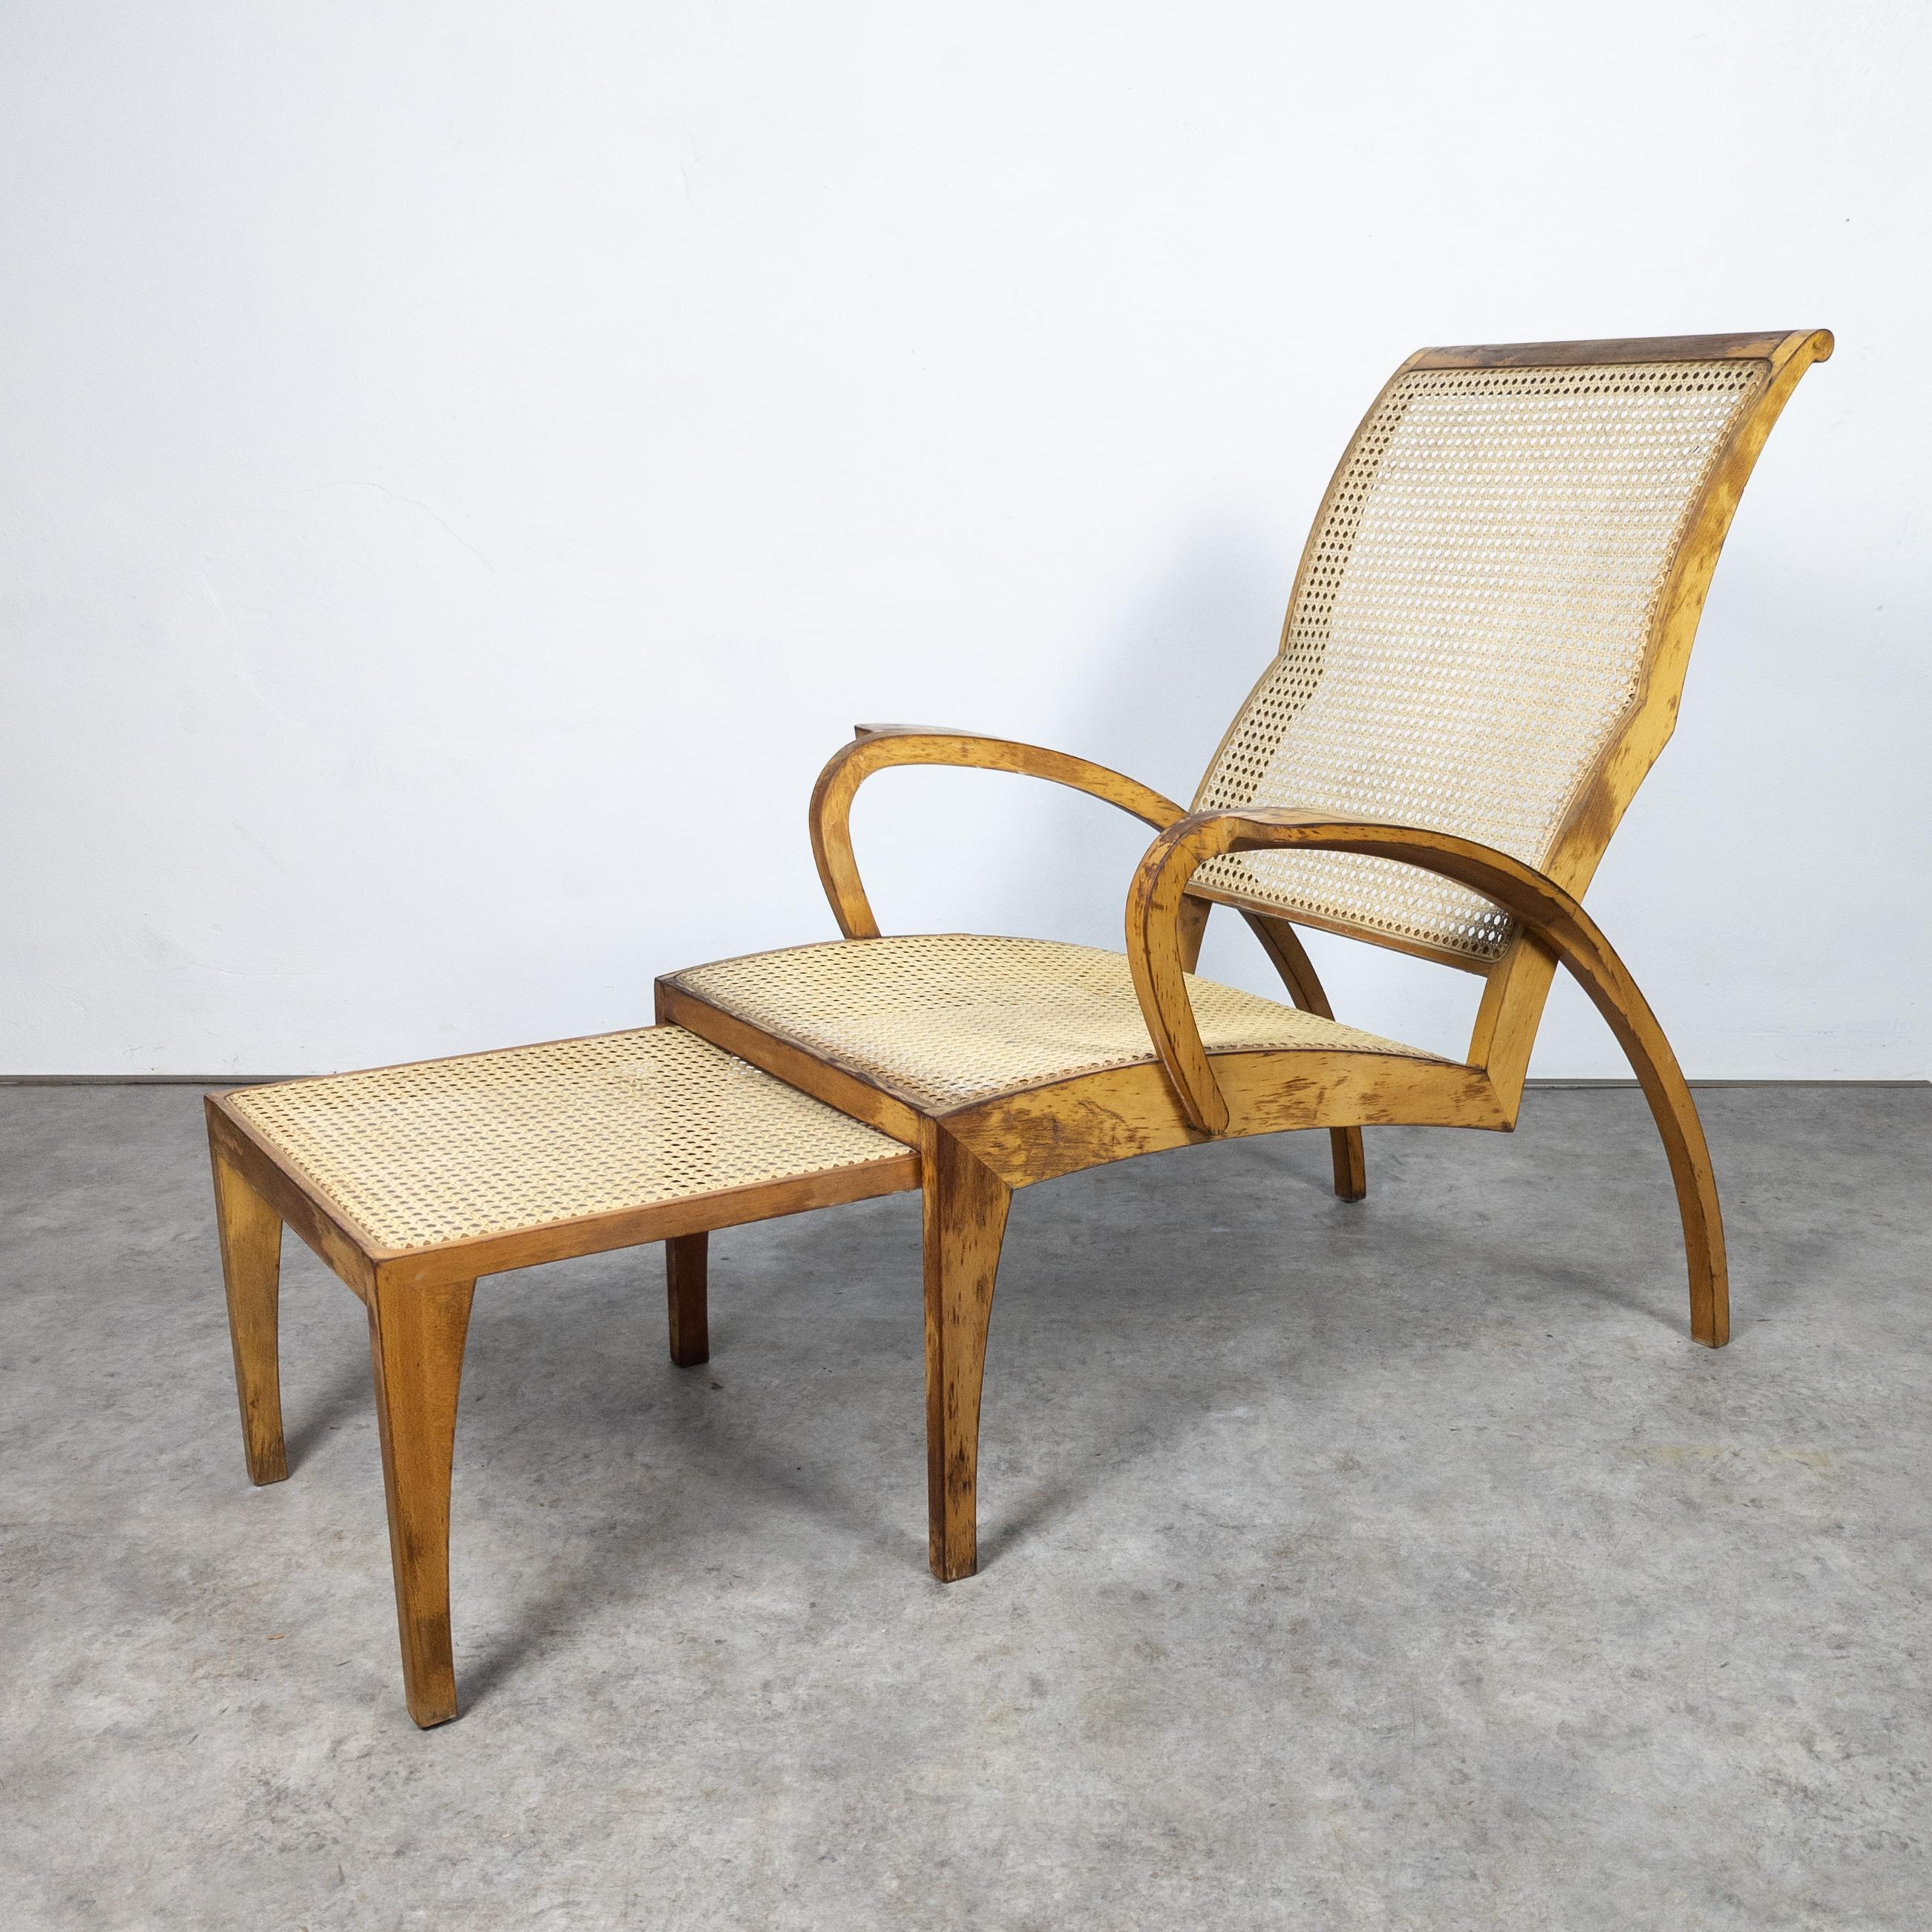 Other Vintage wood and rattan patio chaise lounge from Krasna Jizba 1930s For Sale